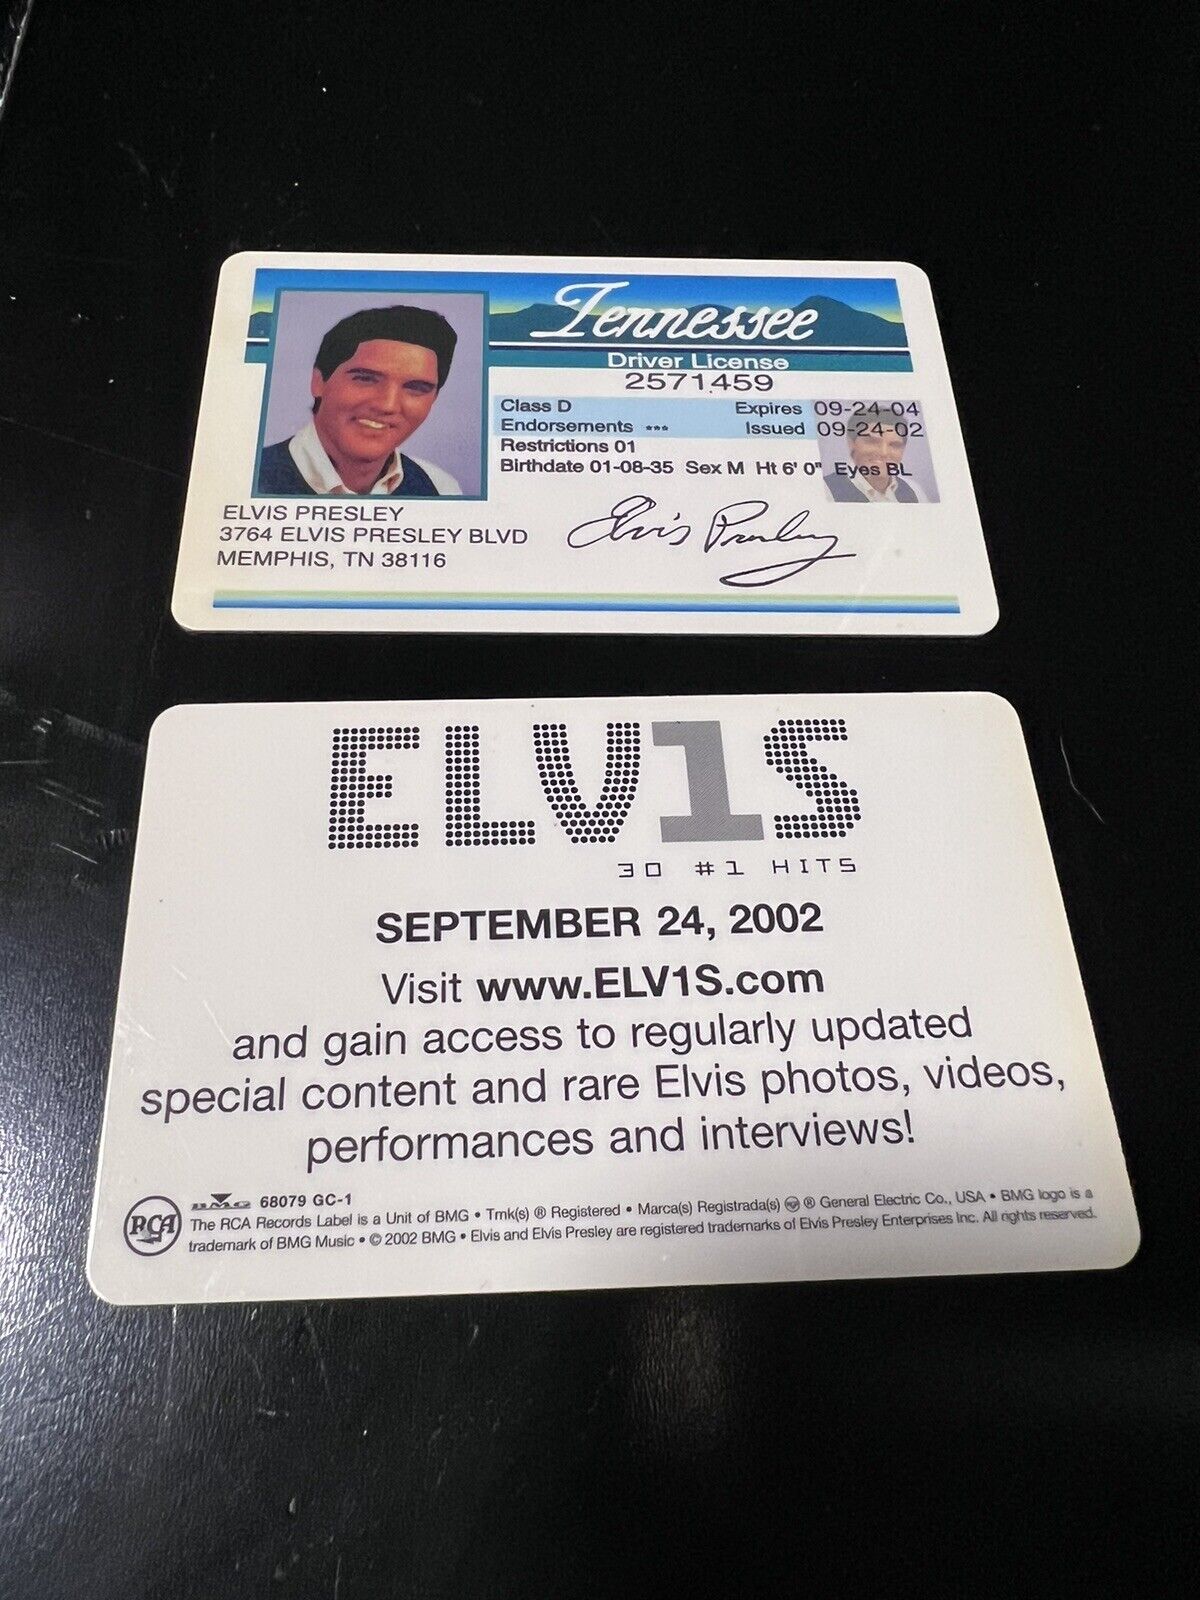 Set of TWO = Elvis Presley drivers license reproduction - RCA Records 2002